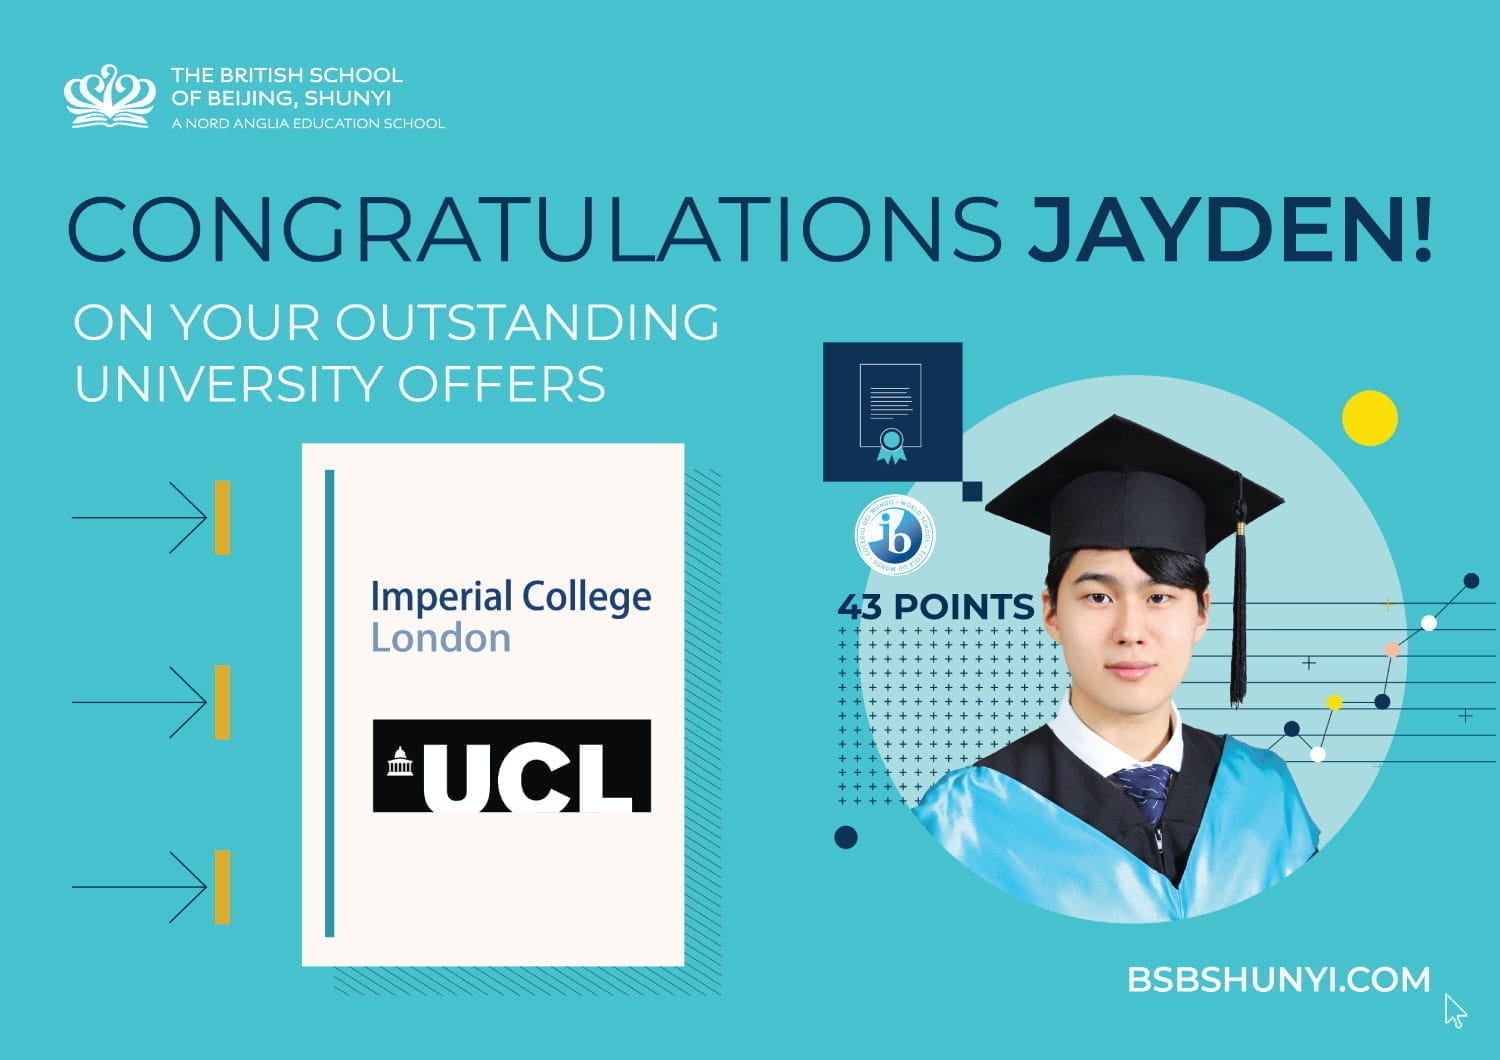 Jayden Kim - Imperial College London and UCL Offers - Jayden Kim - Imperial College London and UCL Offers